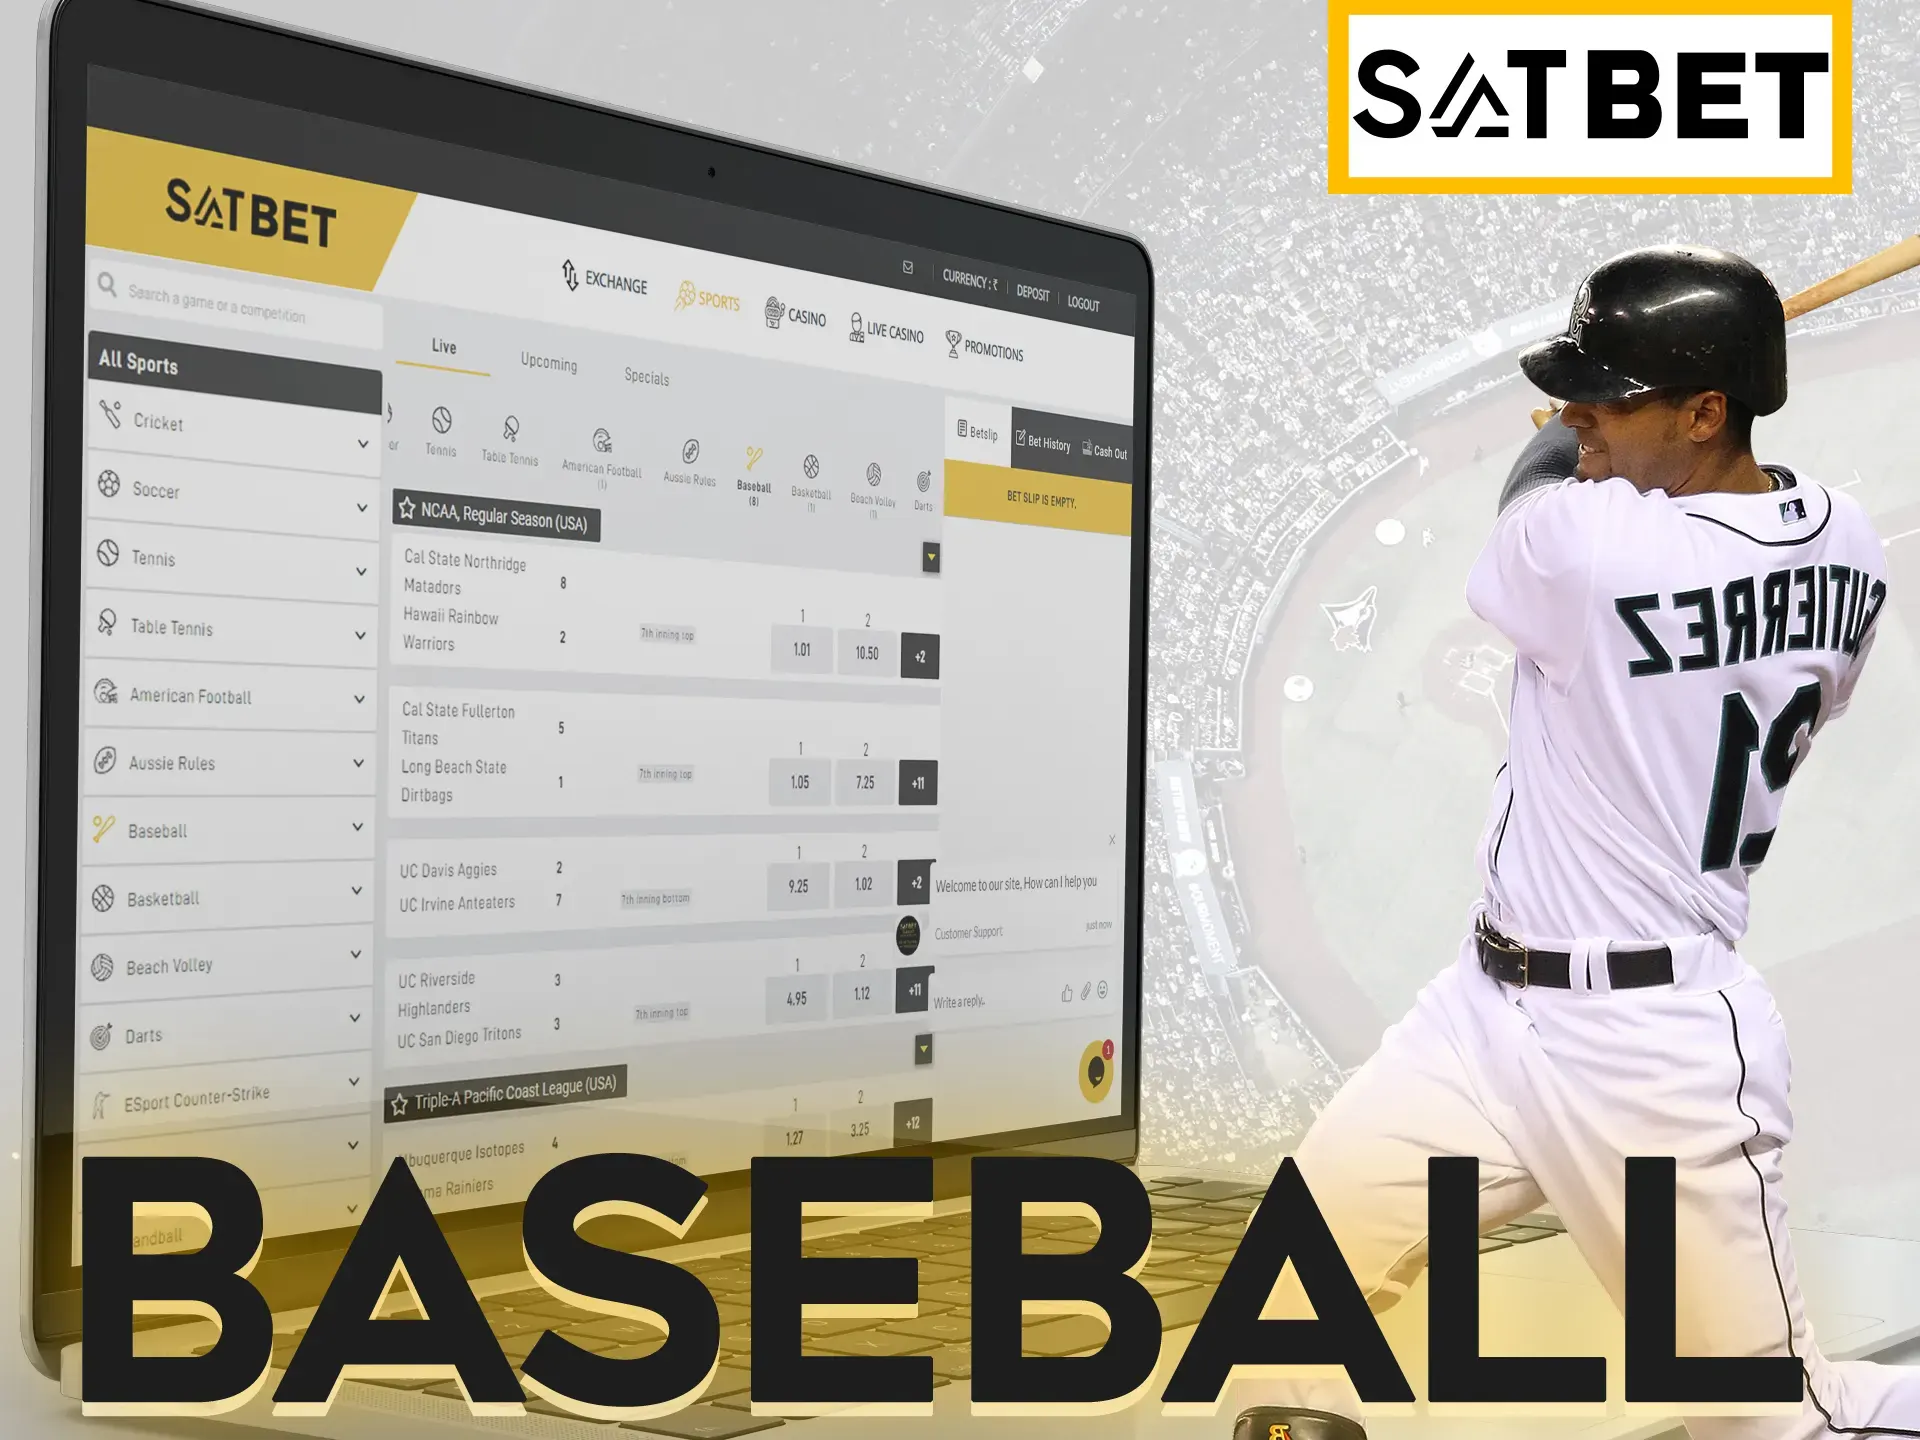 Entertain yourself by betting on baseball matches at Satbet.